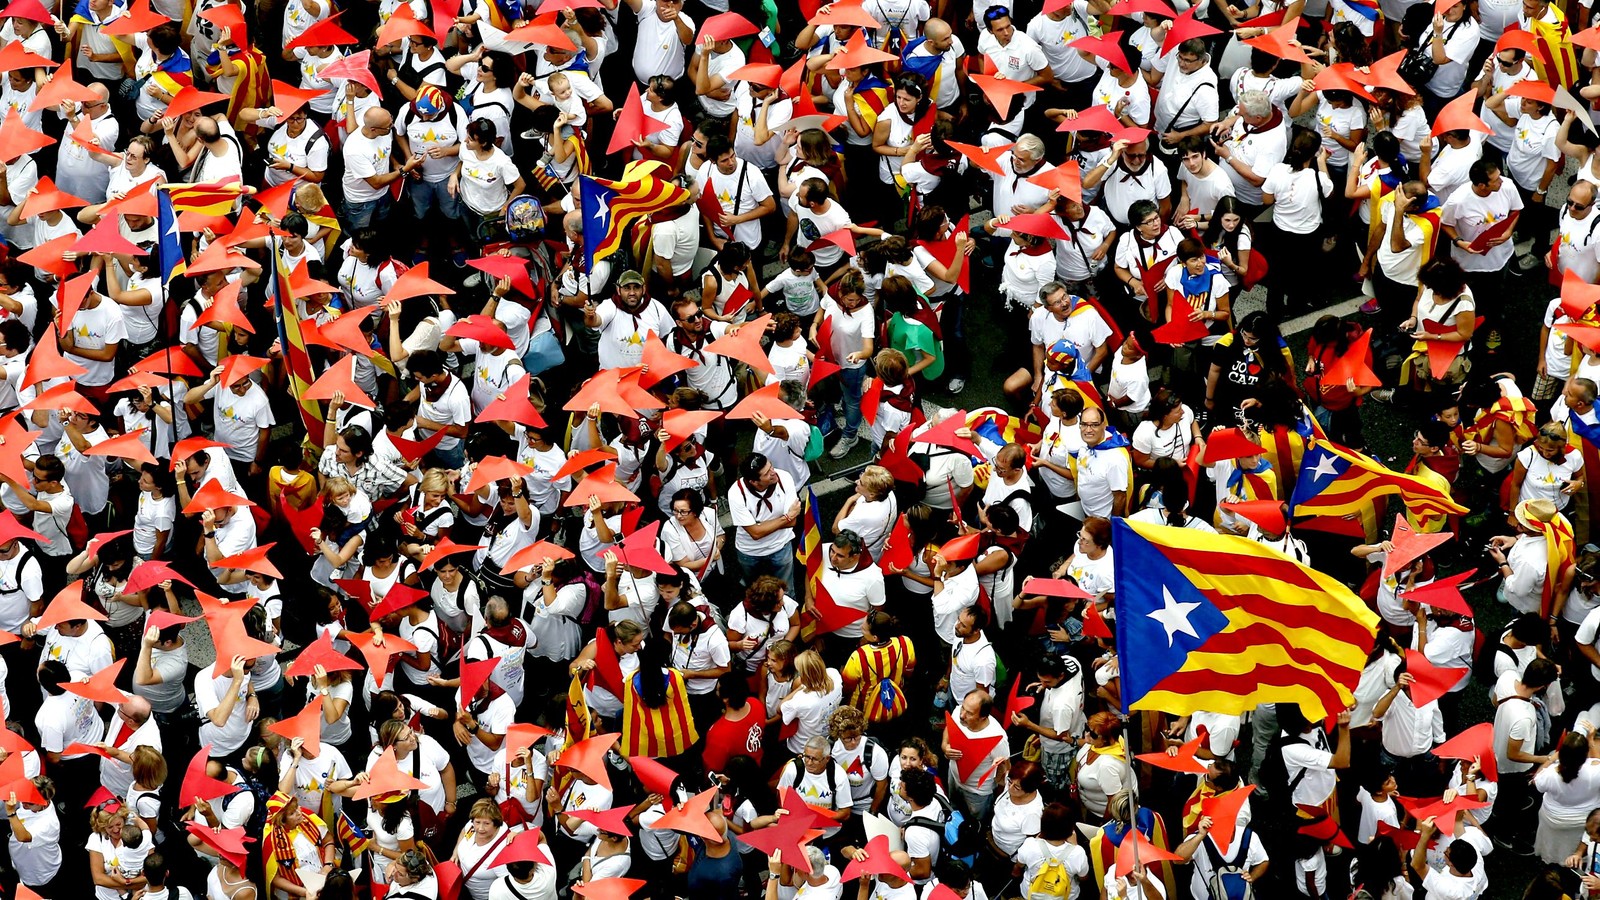 The state of the Catalan language